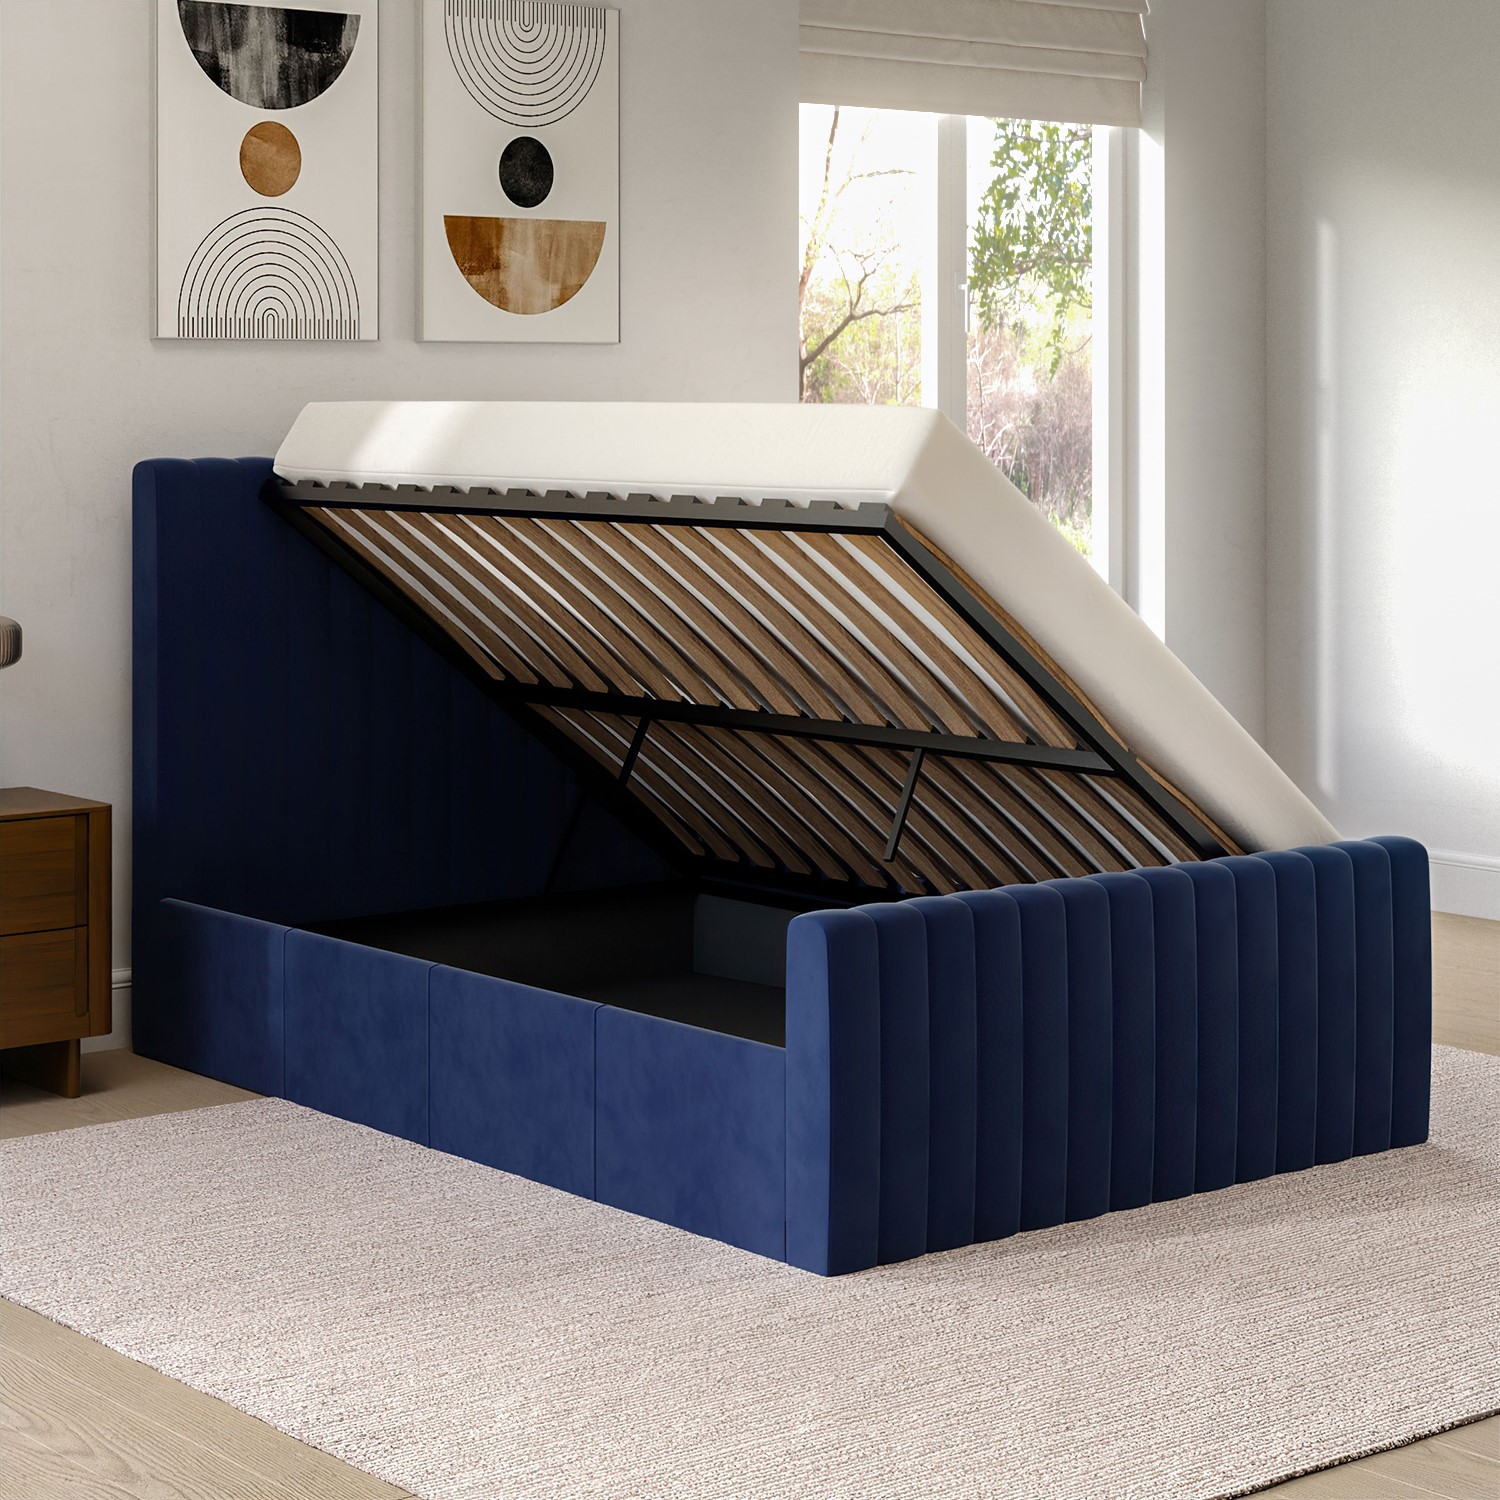 Read more about Side opening navy blue velvet king size ottoman bed khloe